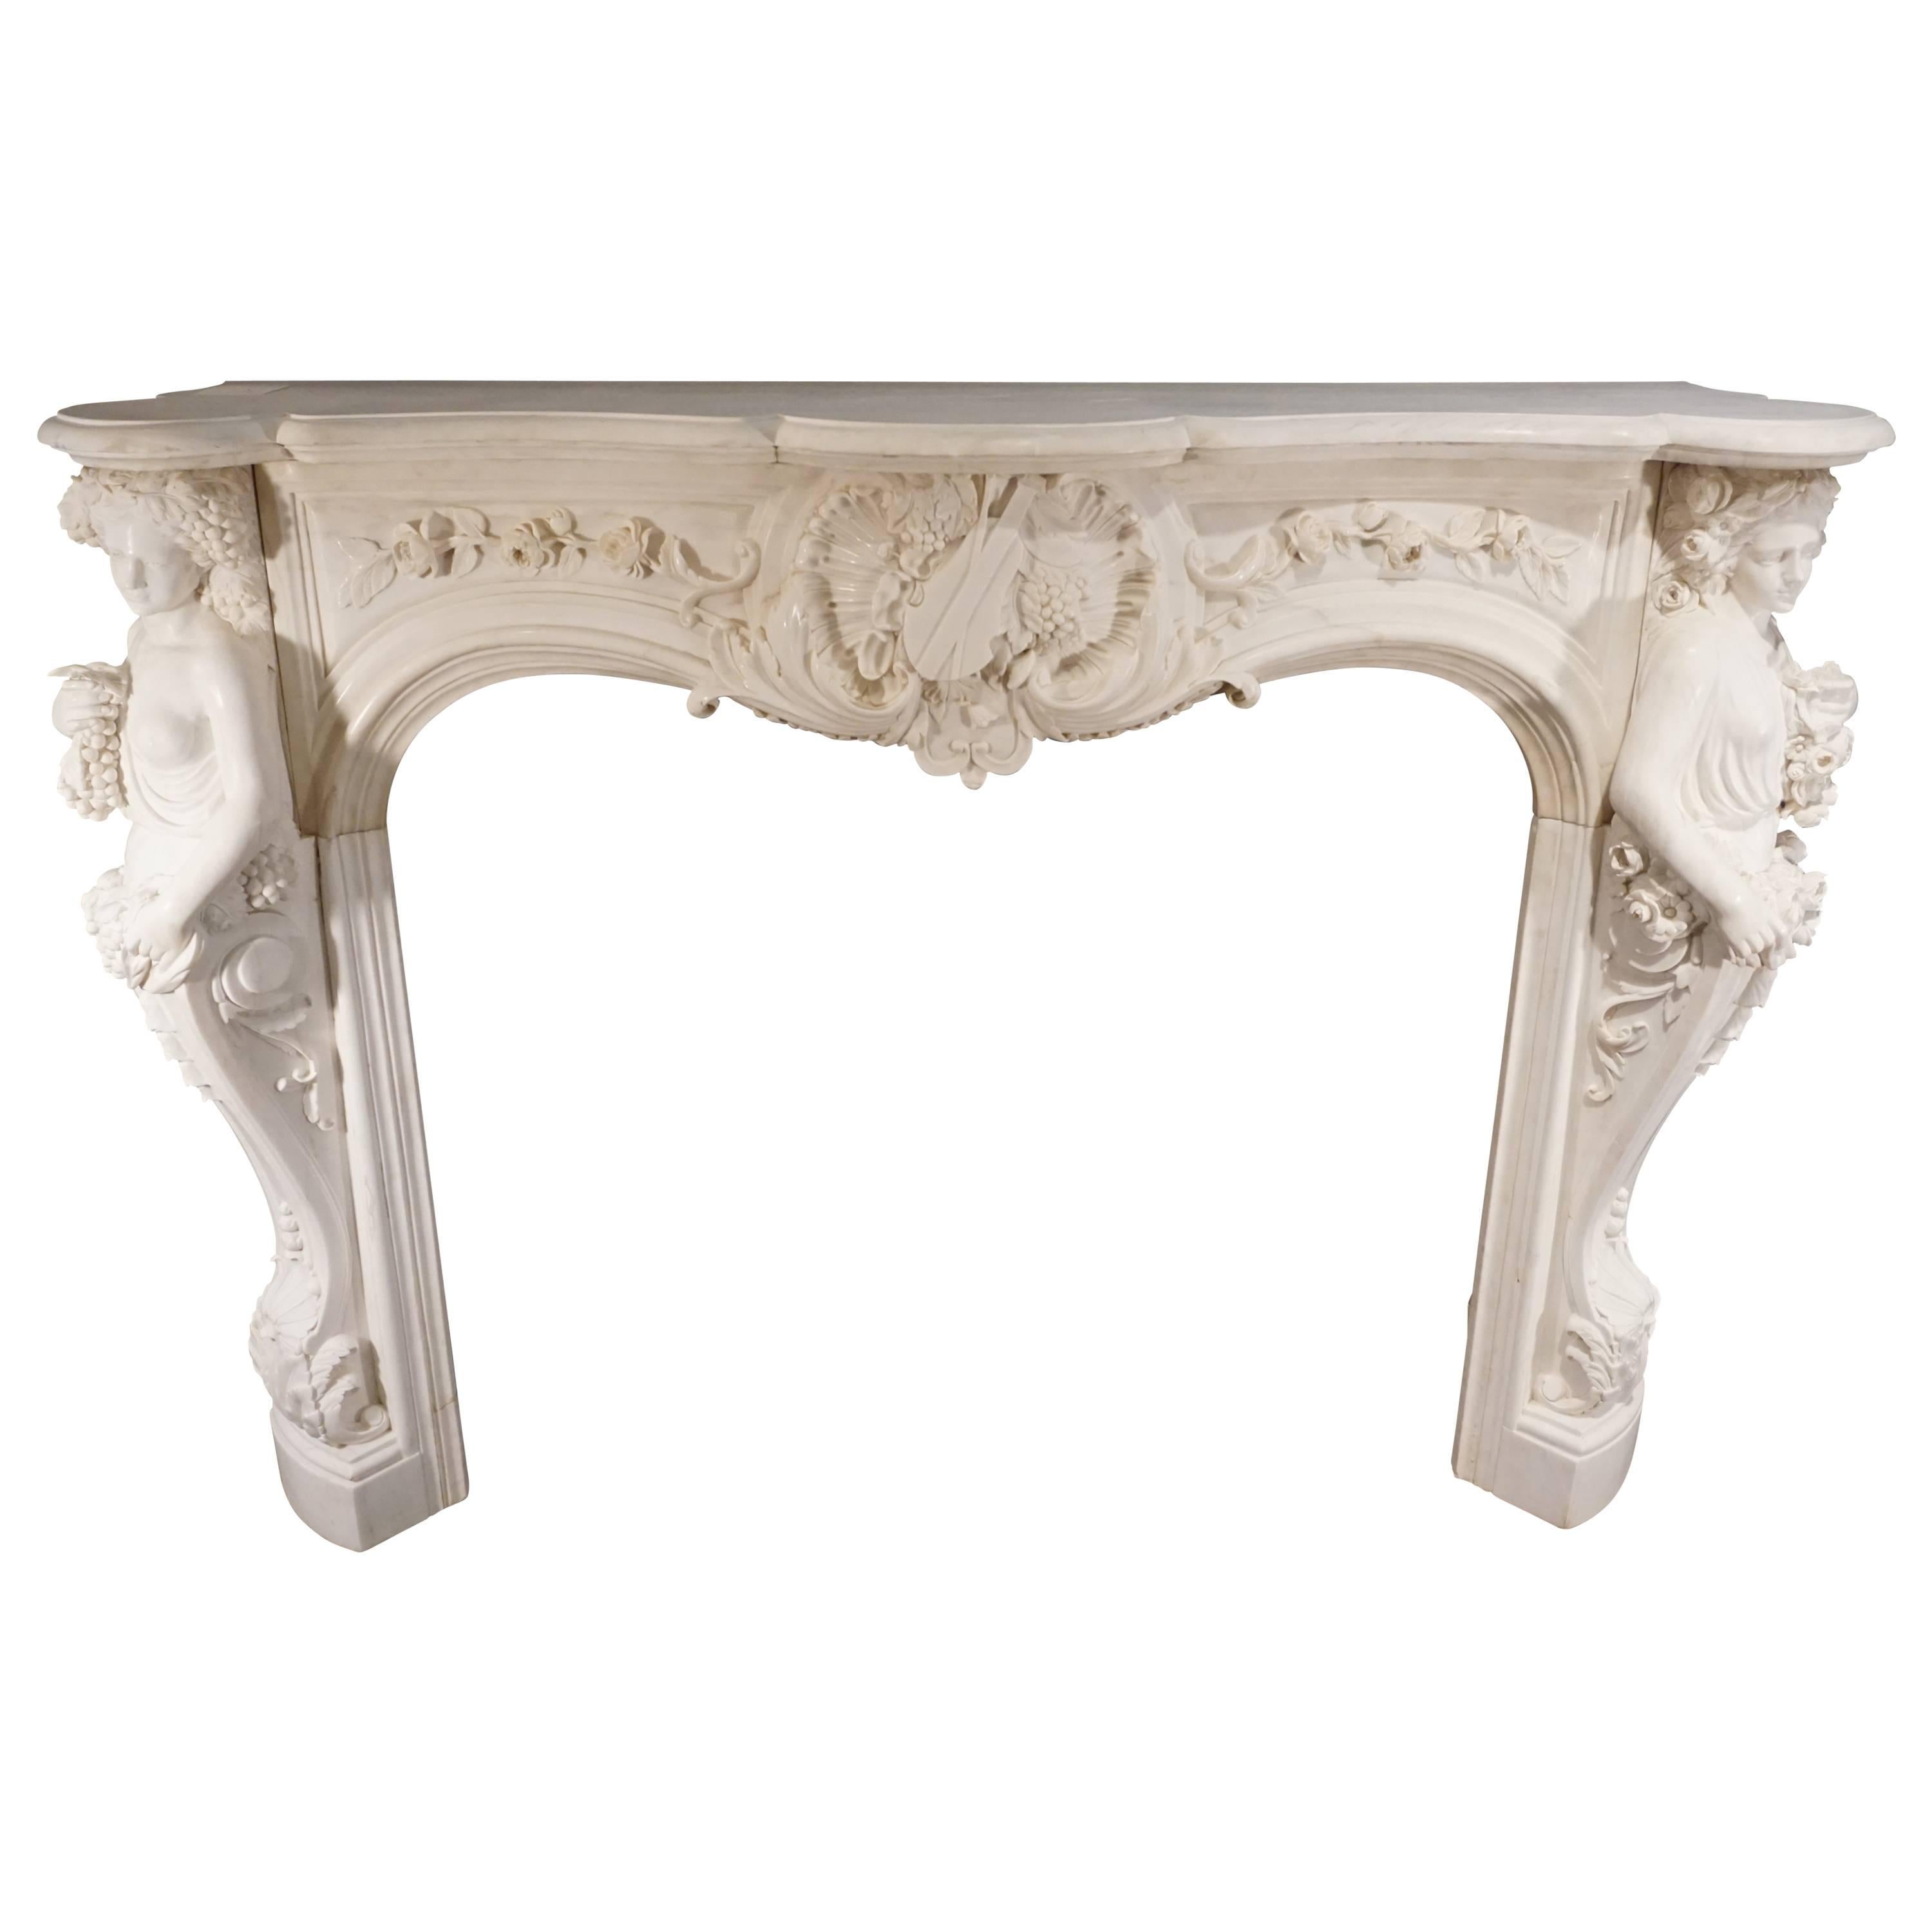 Heavily Carved Carrera Marble Mantel with Caryatids of Summer and Autumn